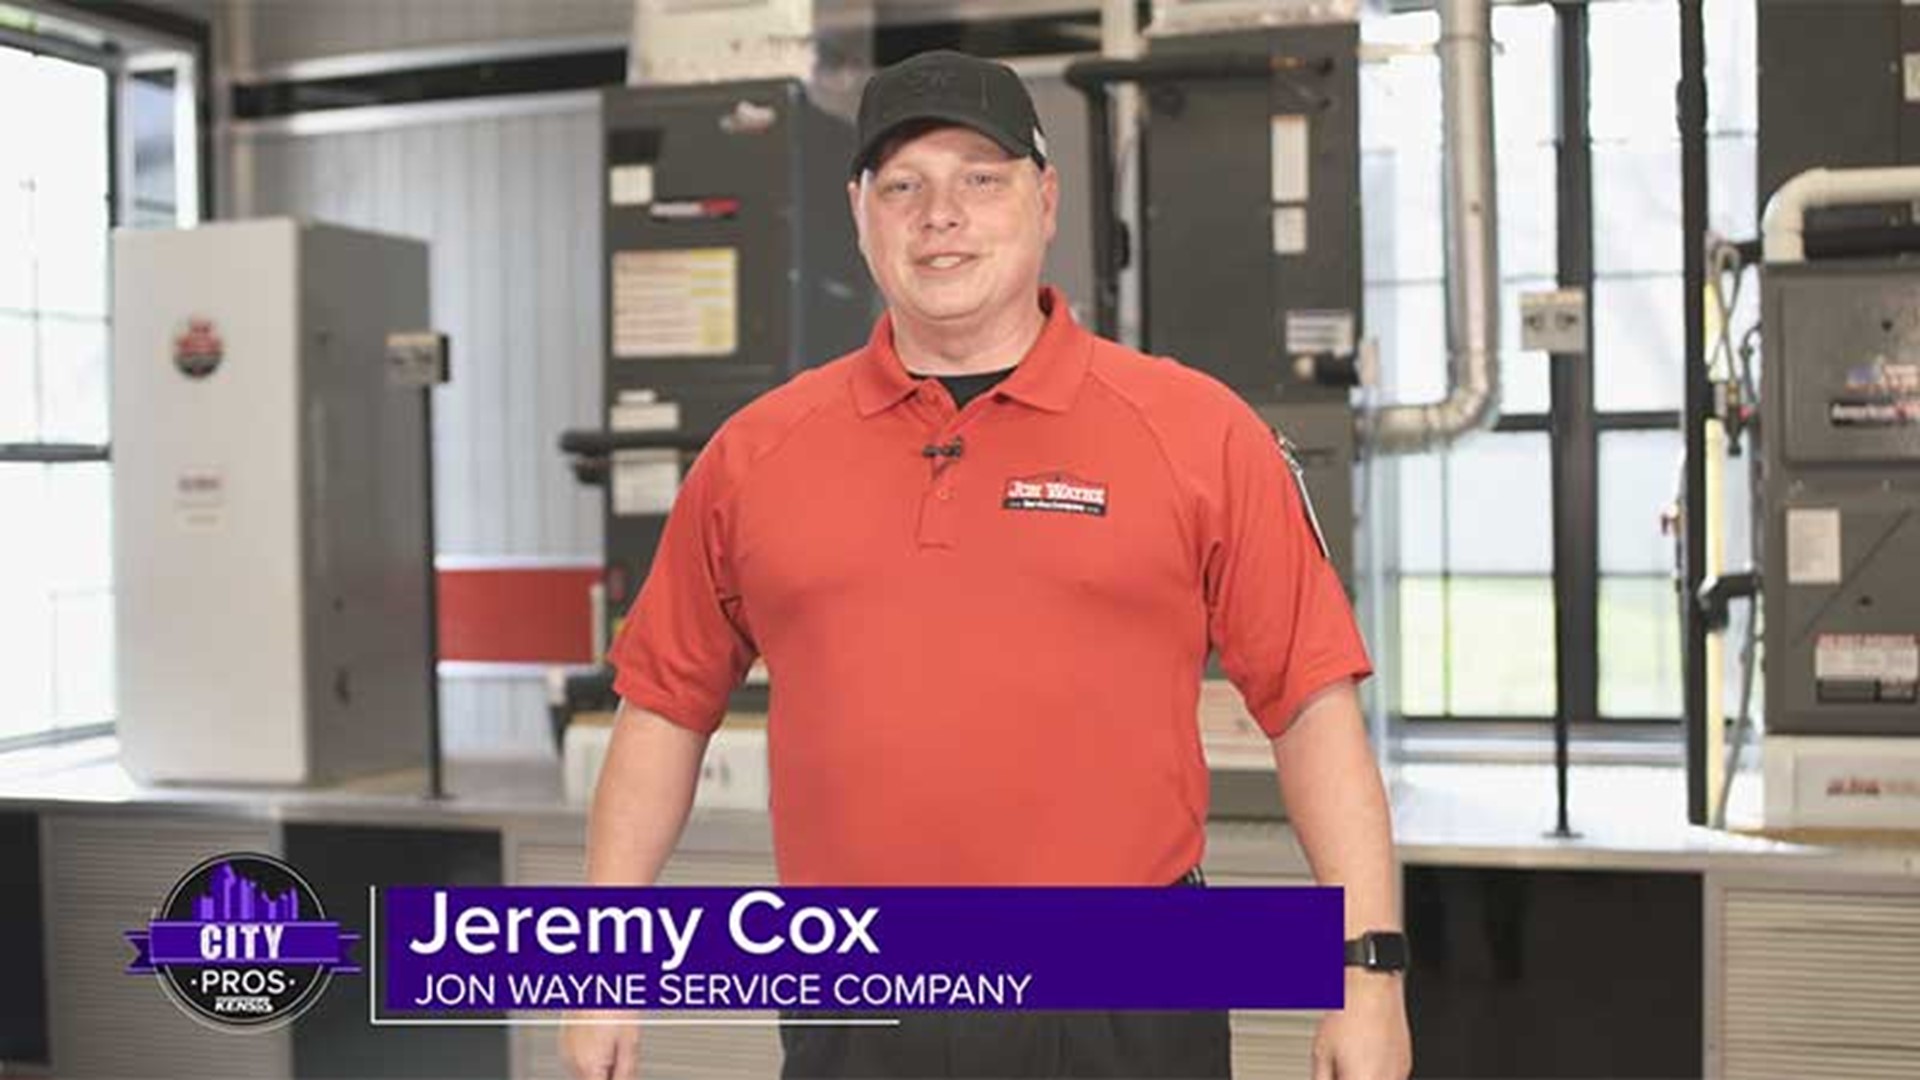 Jon Wayne will help make sure you get the right air conditioning system for your home. It's really important to properly size your system to maximize savings on your utility bills.